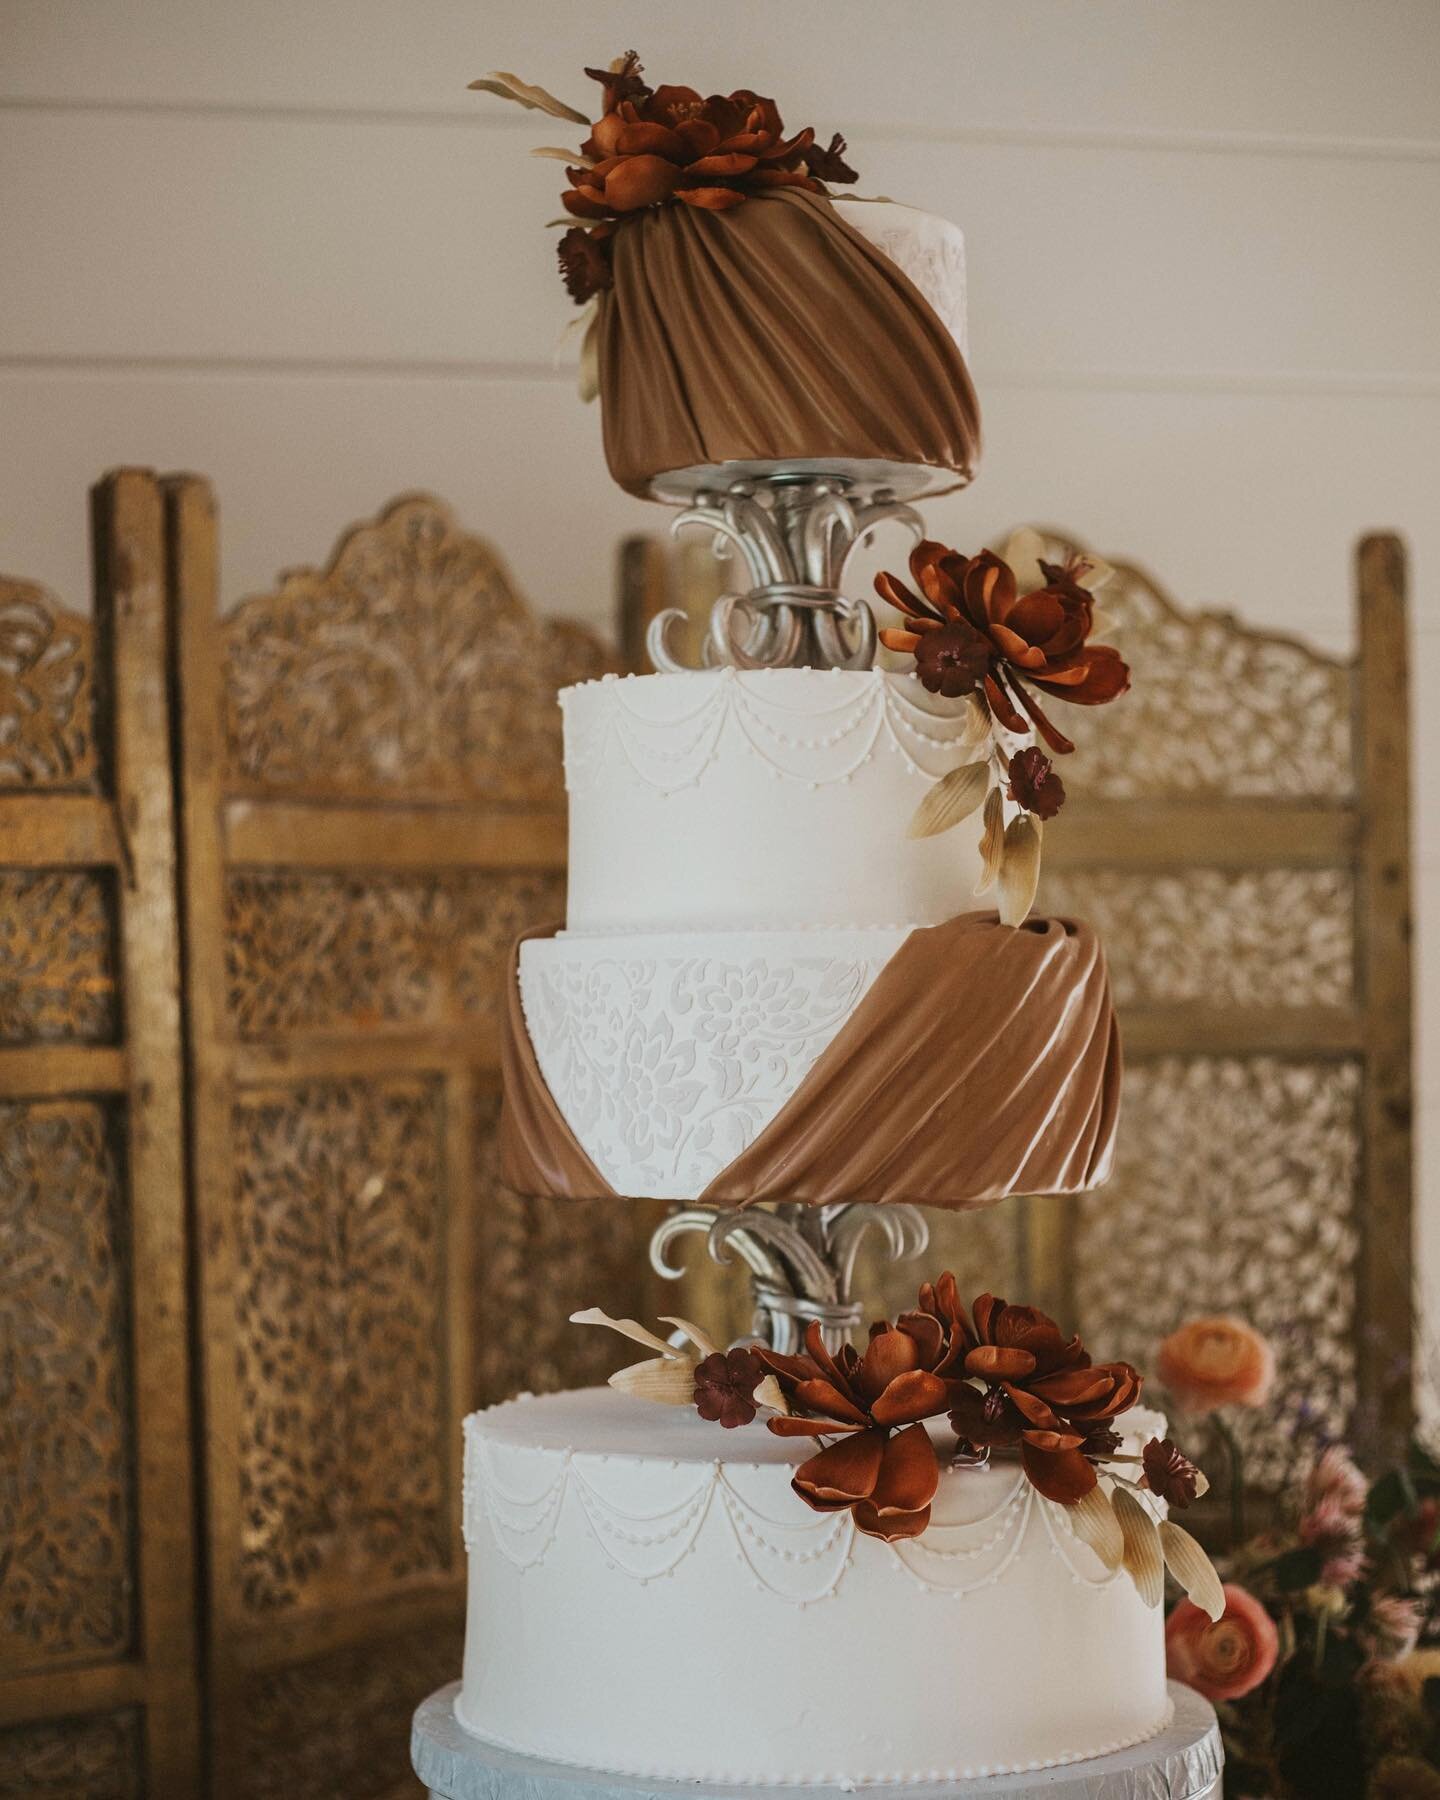 This cake looks almost too good to eat! These gorgeous muted tones are something out of my dreams. What is your favorite flavor of cake? Leave a comment below! I am totally a red velvet girl!
-
-
-
-
Host: @shelbyhortonphotography
Venue: @thewildsvenue
Cake: @classiccakescaramel
Florals: @artful_blooms
D&eacute;cor: @violetvintagerentals &amp; @sparkling_decor_and_more